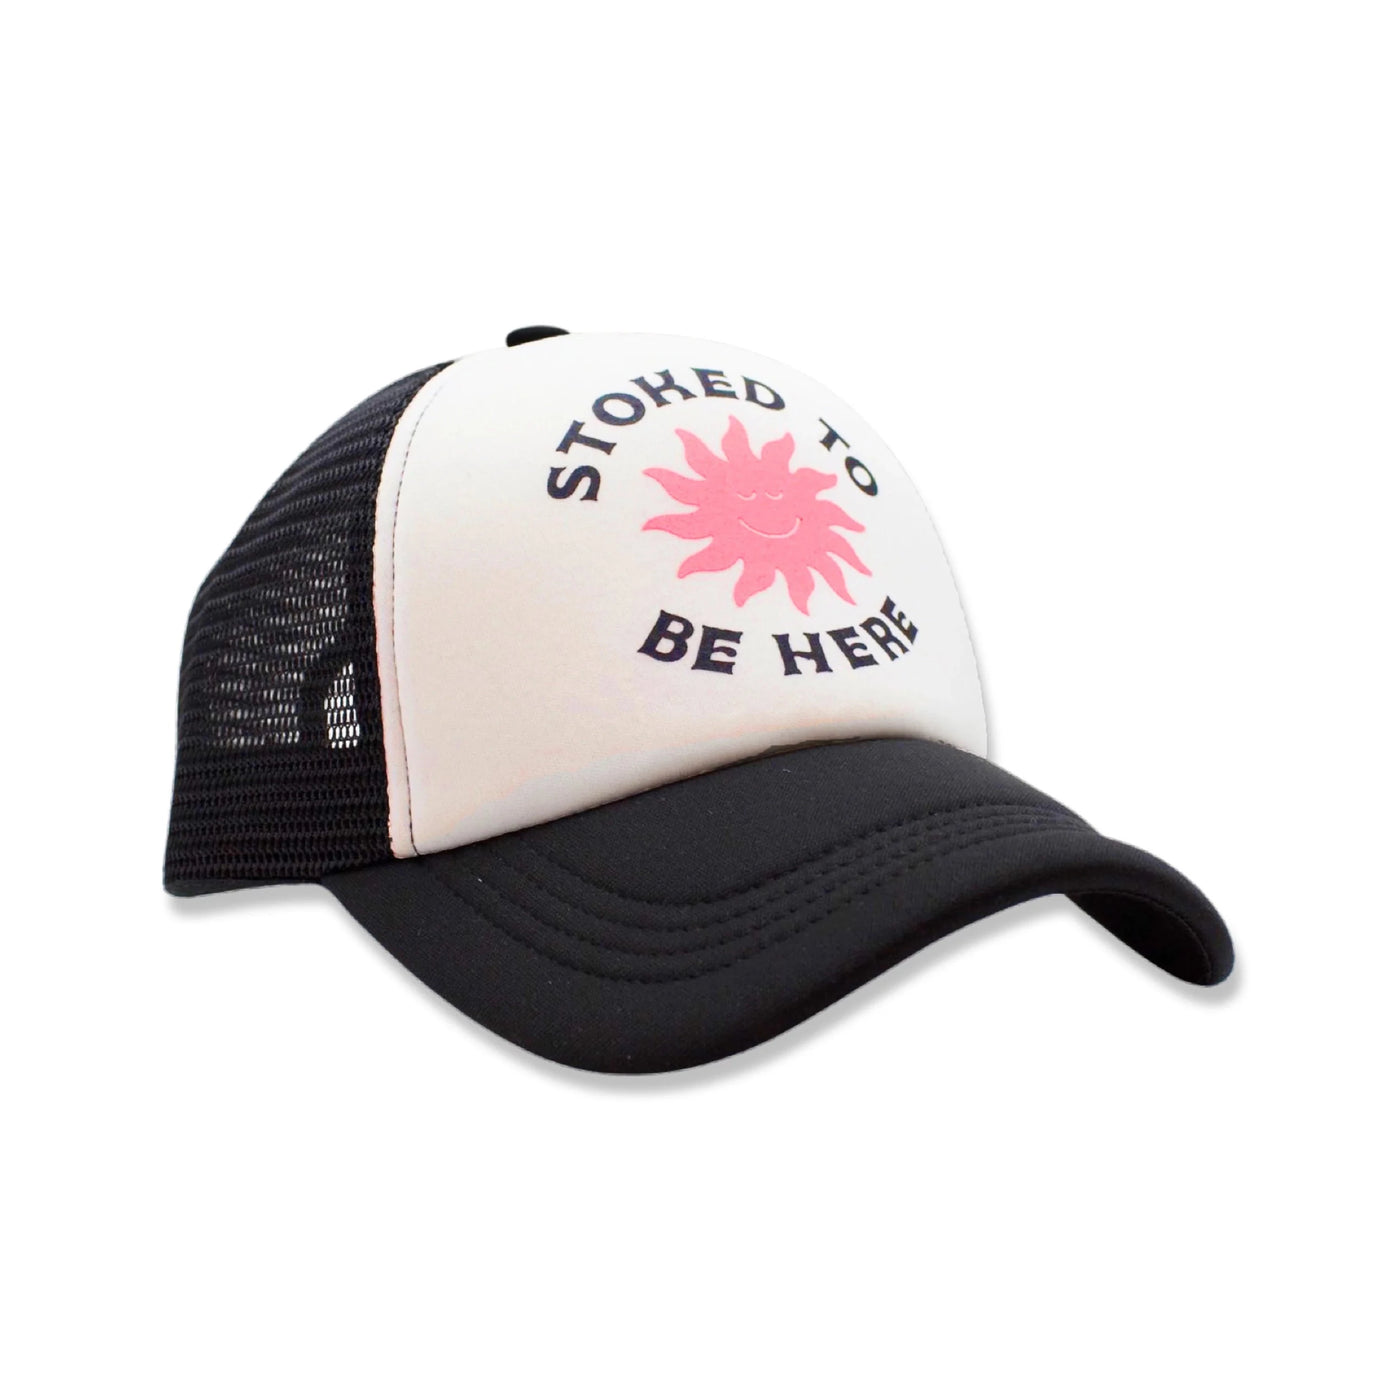 Stoked To Be Here Trucker Hat